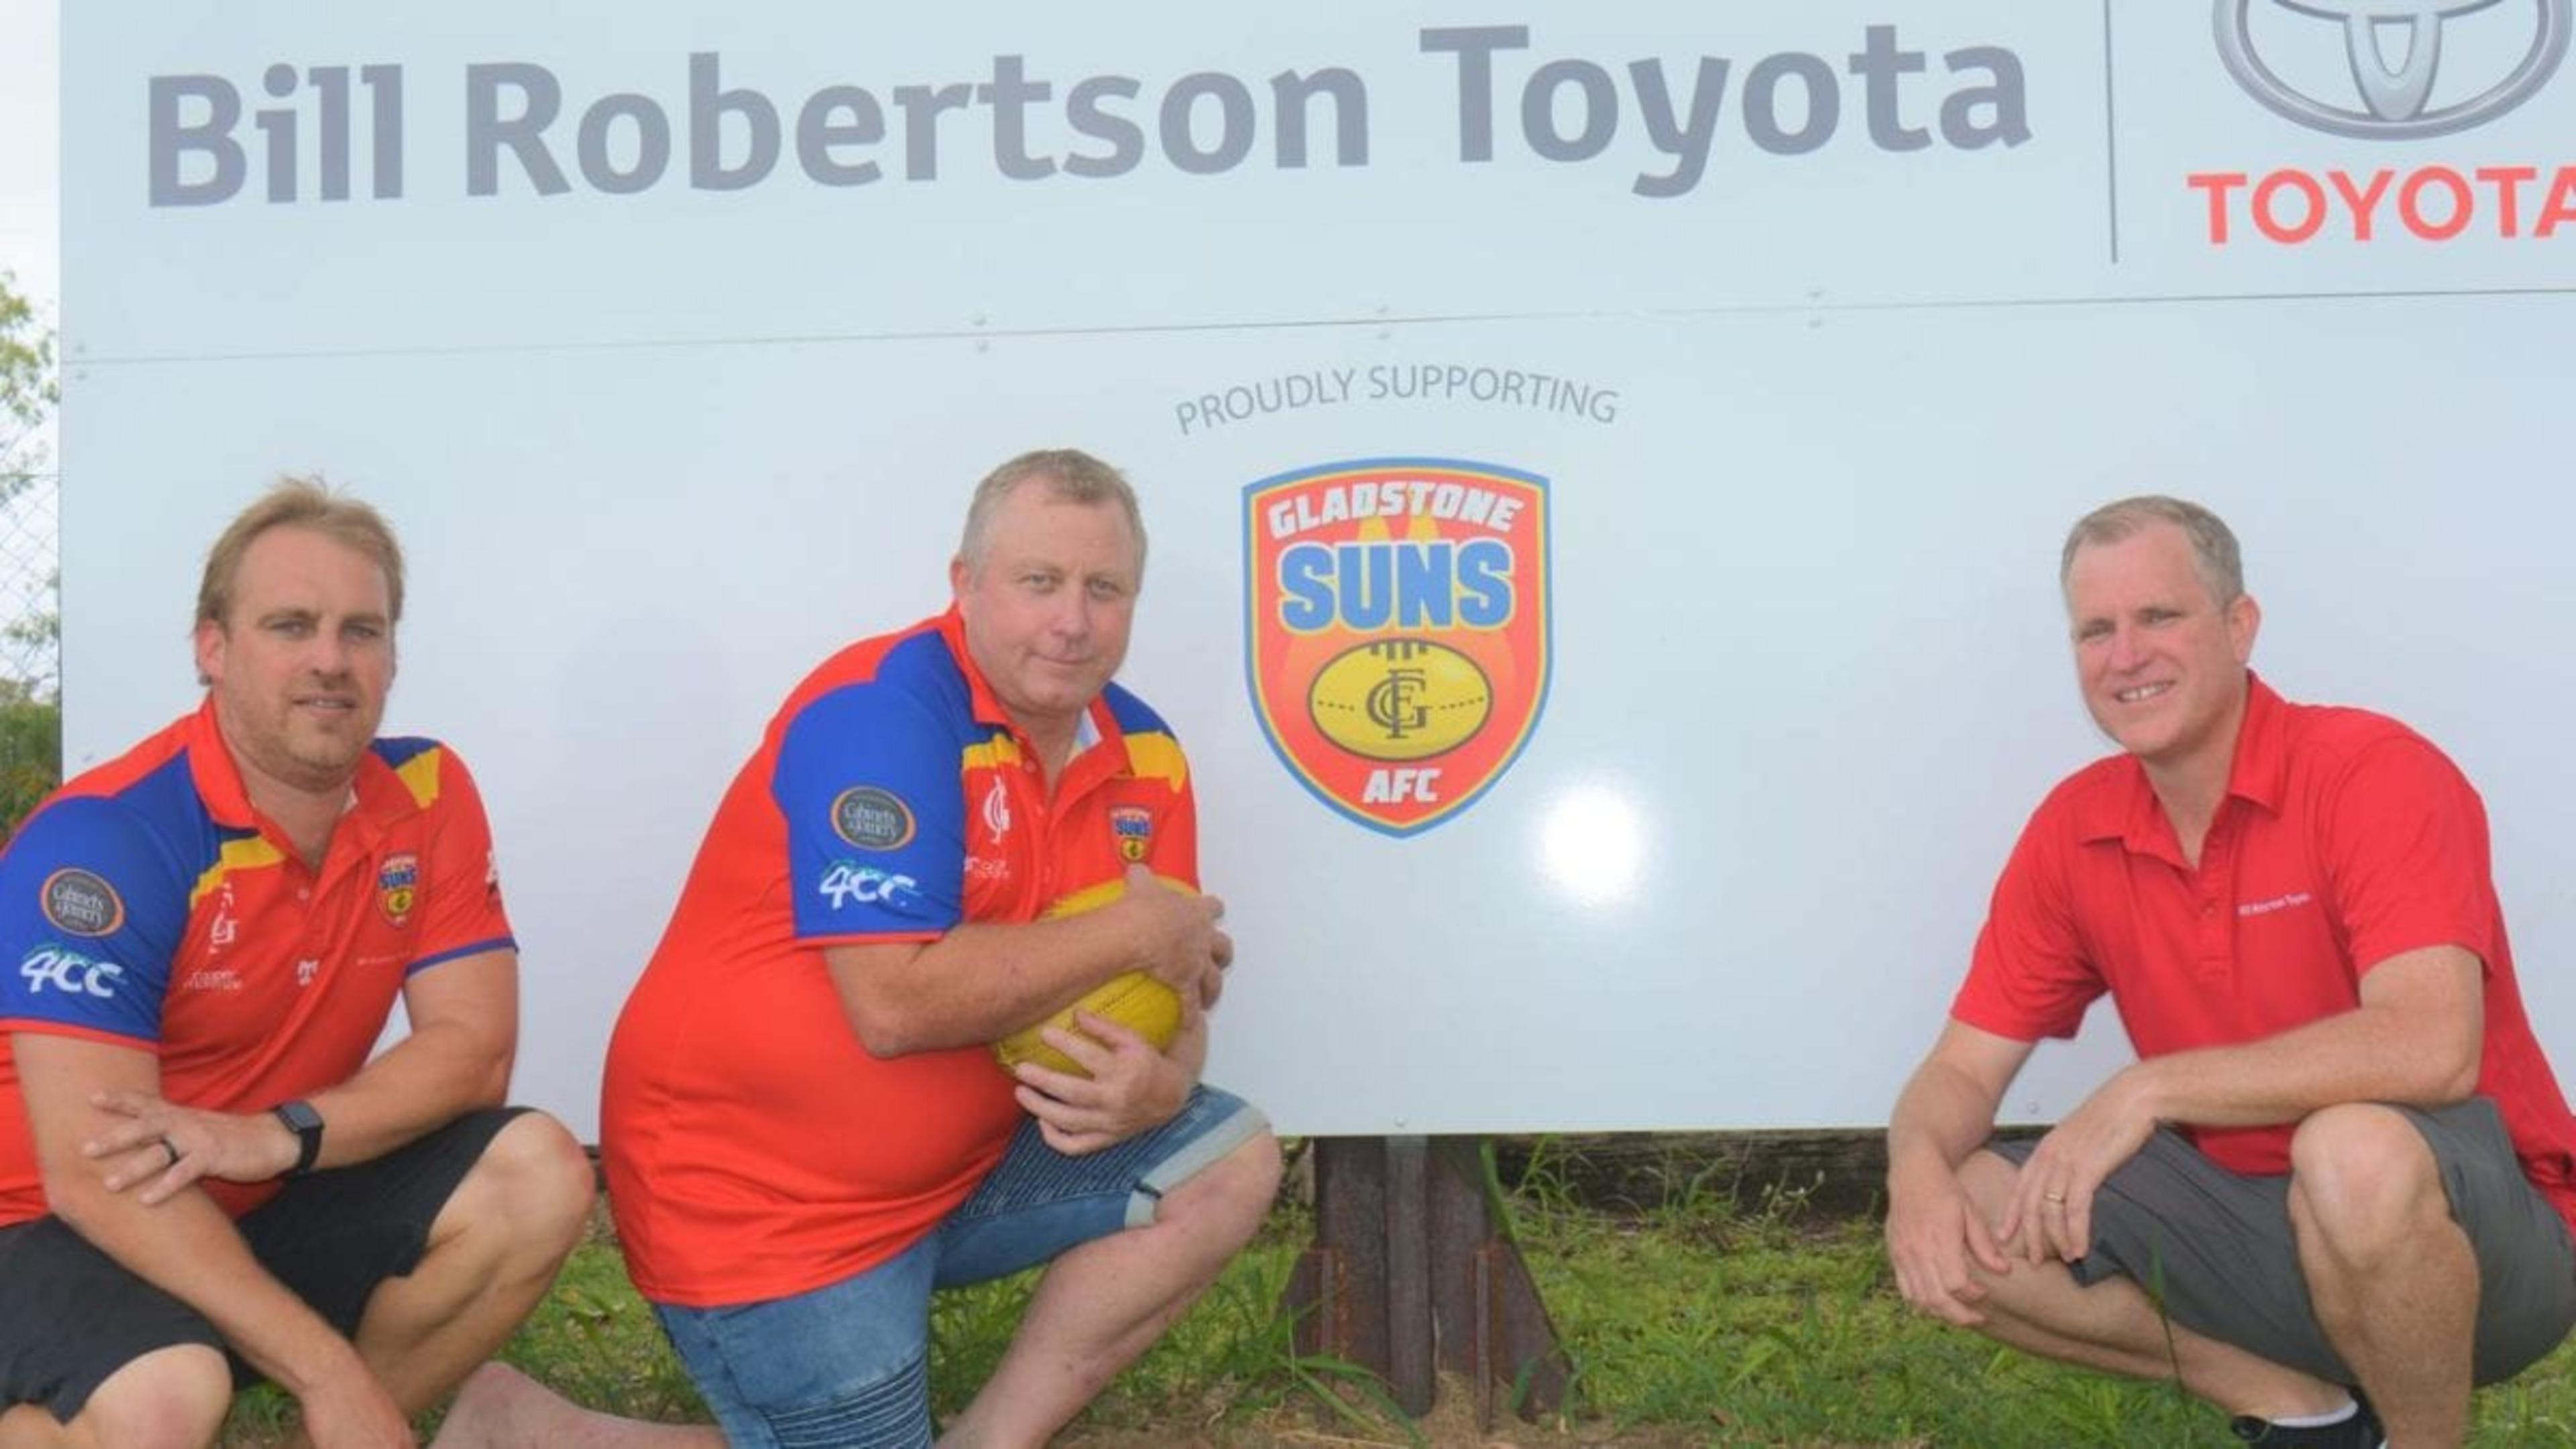 Bill Robertson Toyota Gladstone Suns get their man to lead revival banner